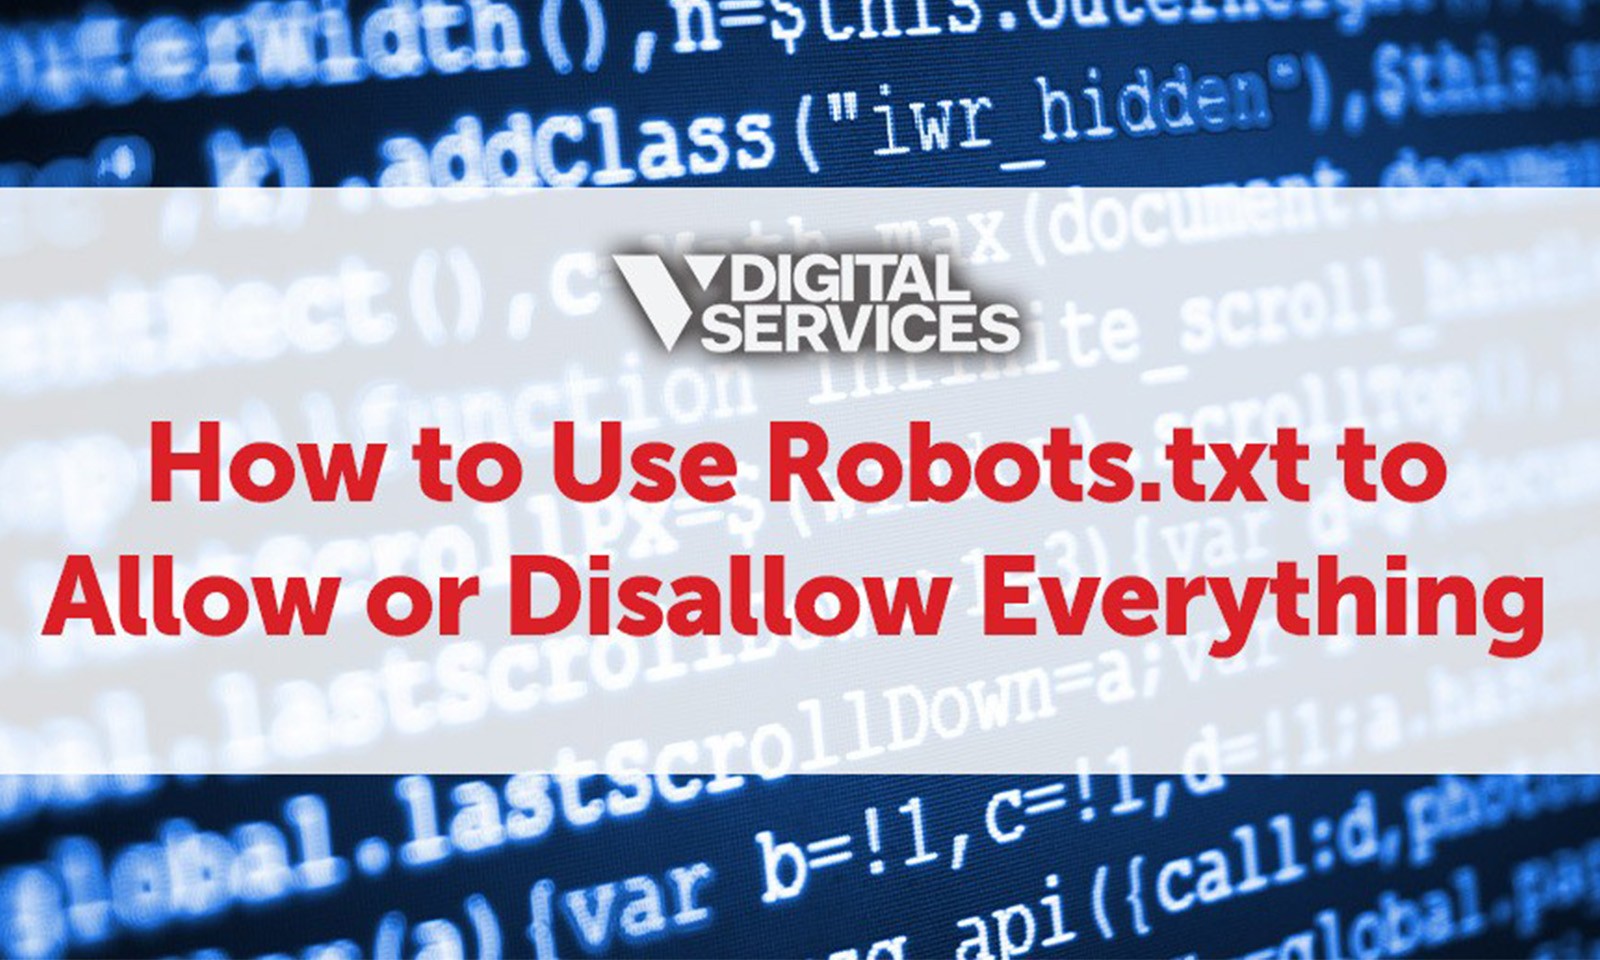 Pick up blade Umeki grad How to Use Robots.txt to Allow or Disallow Everything | V Digital Services  (VDS)